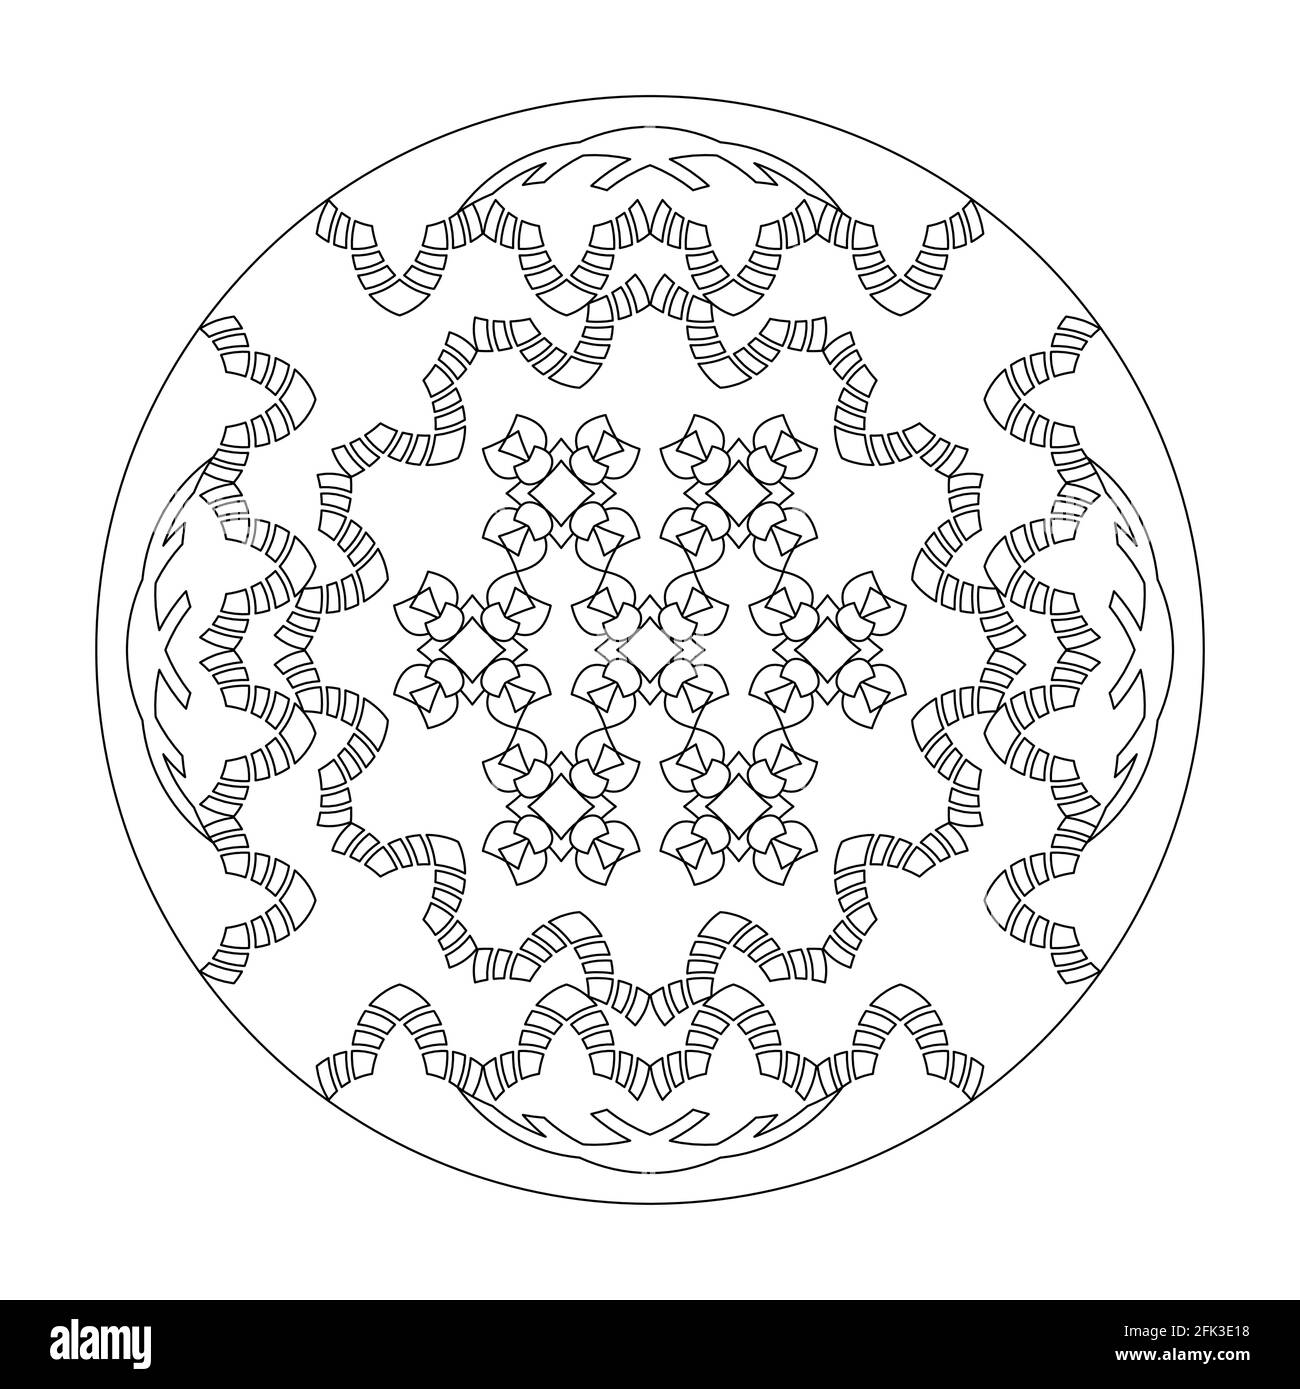 Drawing and Coloring for Calm: Relaxing Mandala Drawing Pages for Adults  (Art Therapy)